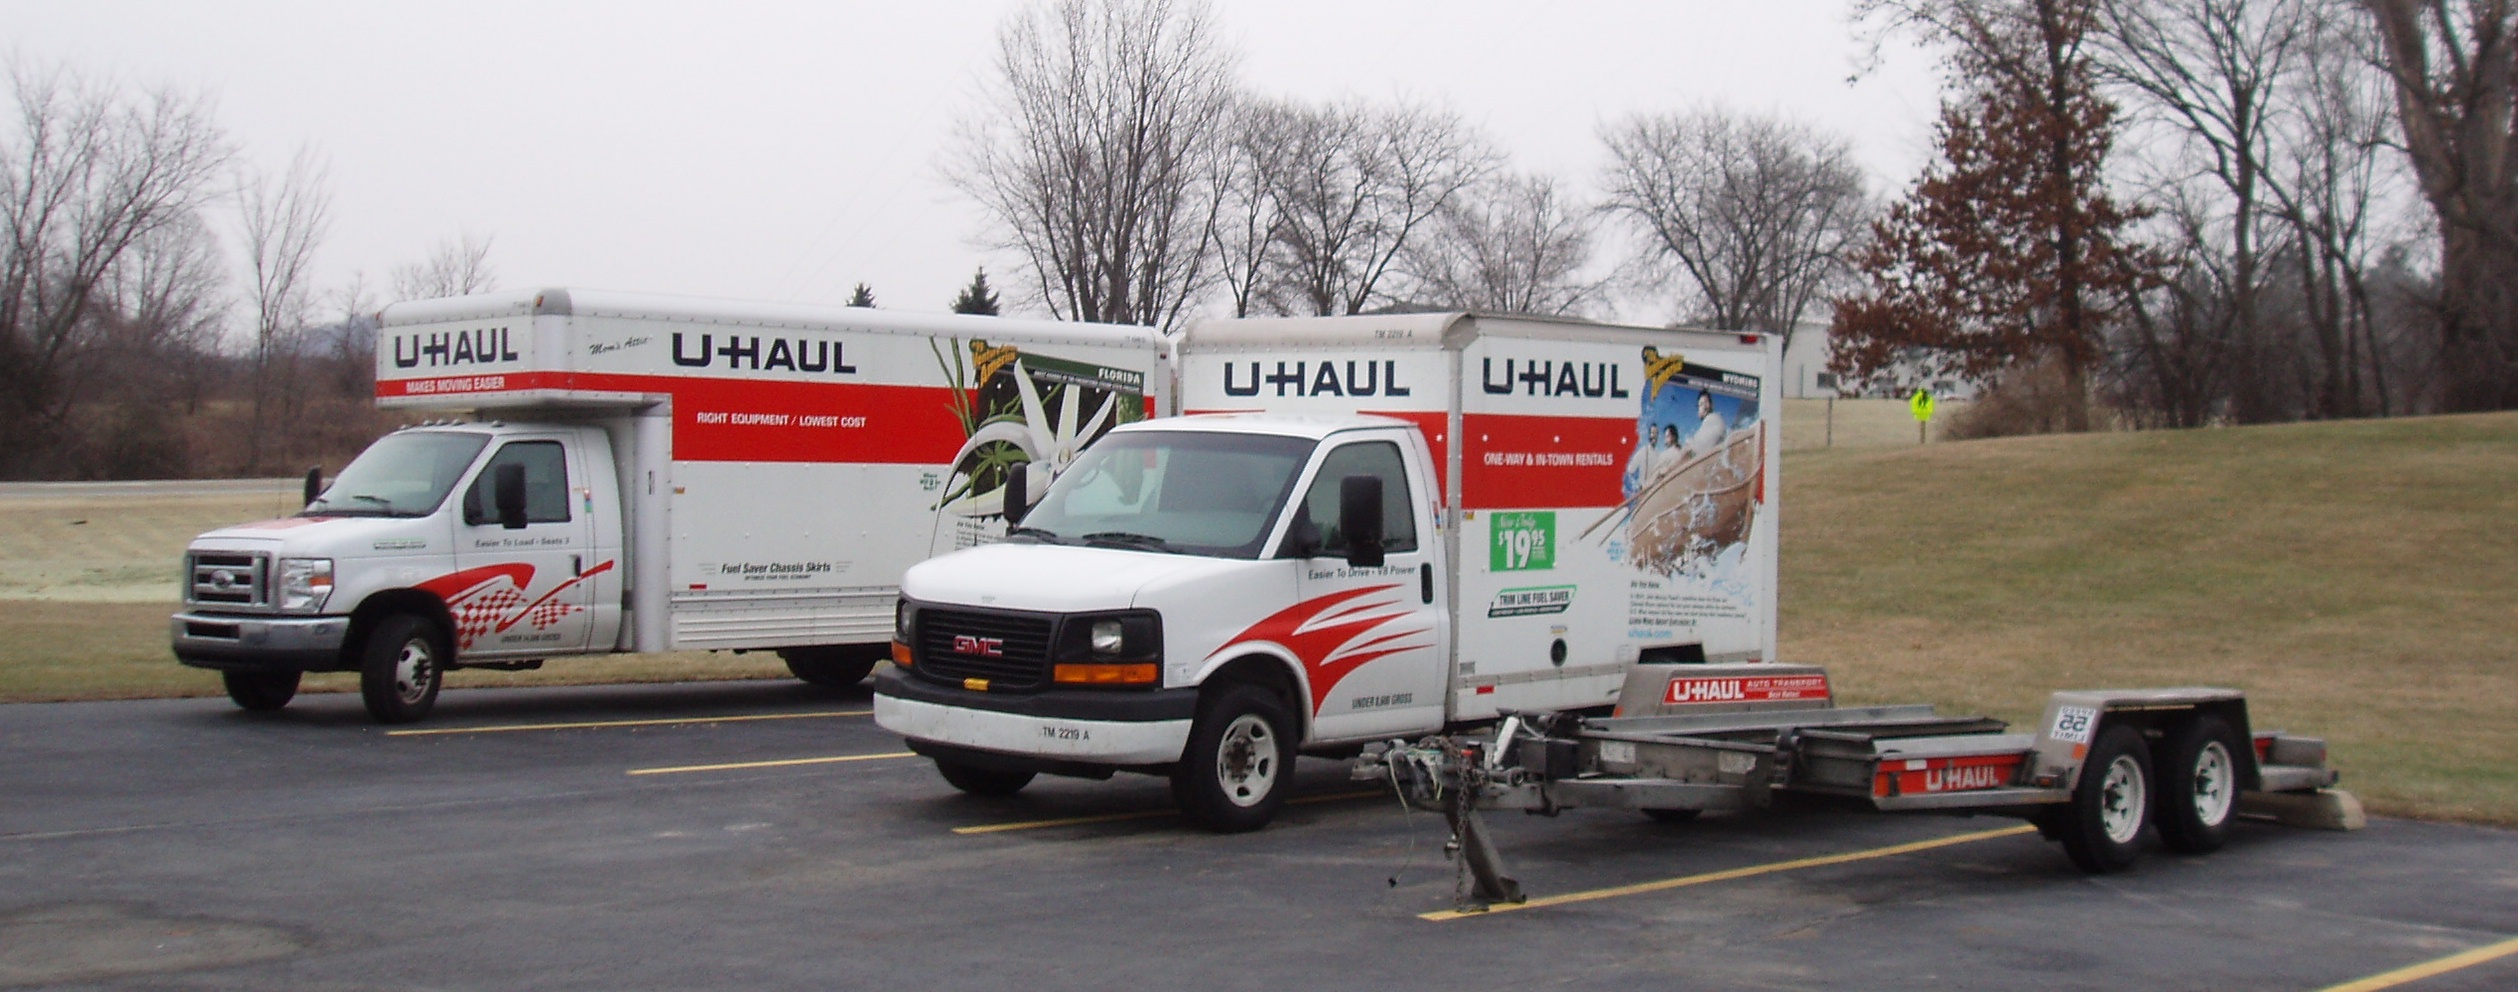 Prices For Prices For Uhaul.